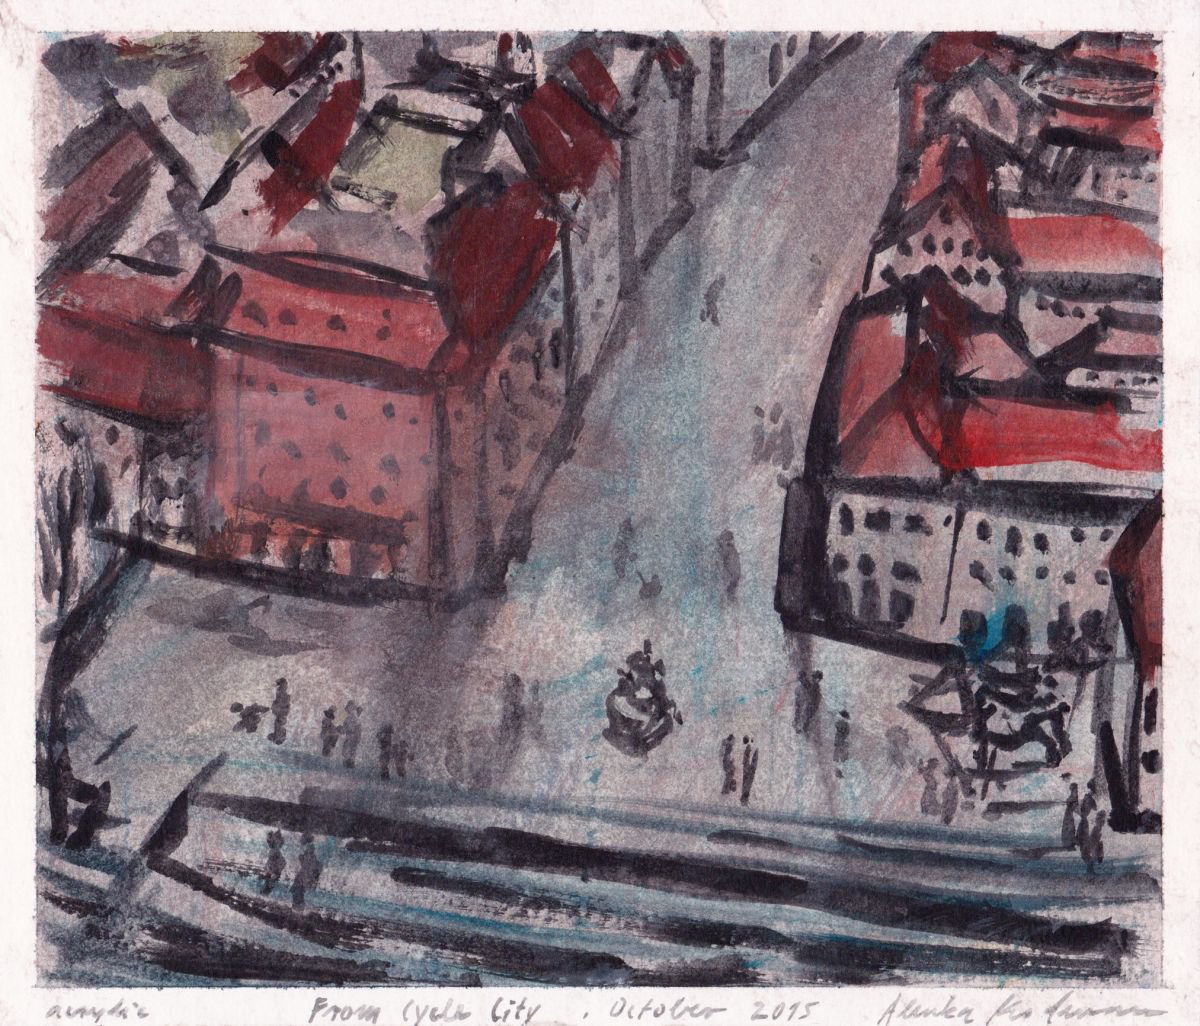 From Cycle City / Breg and Novi trg, October 2015, acrylic on paper by Alenka Koderman